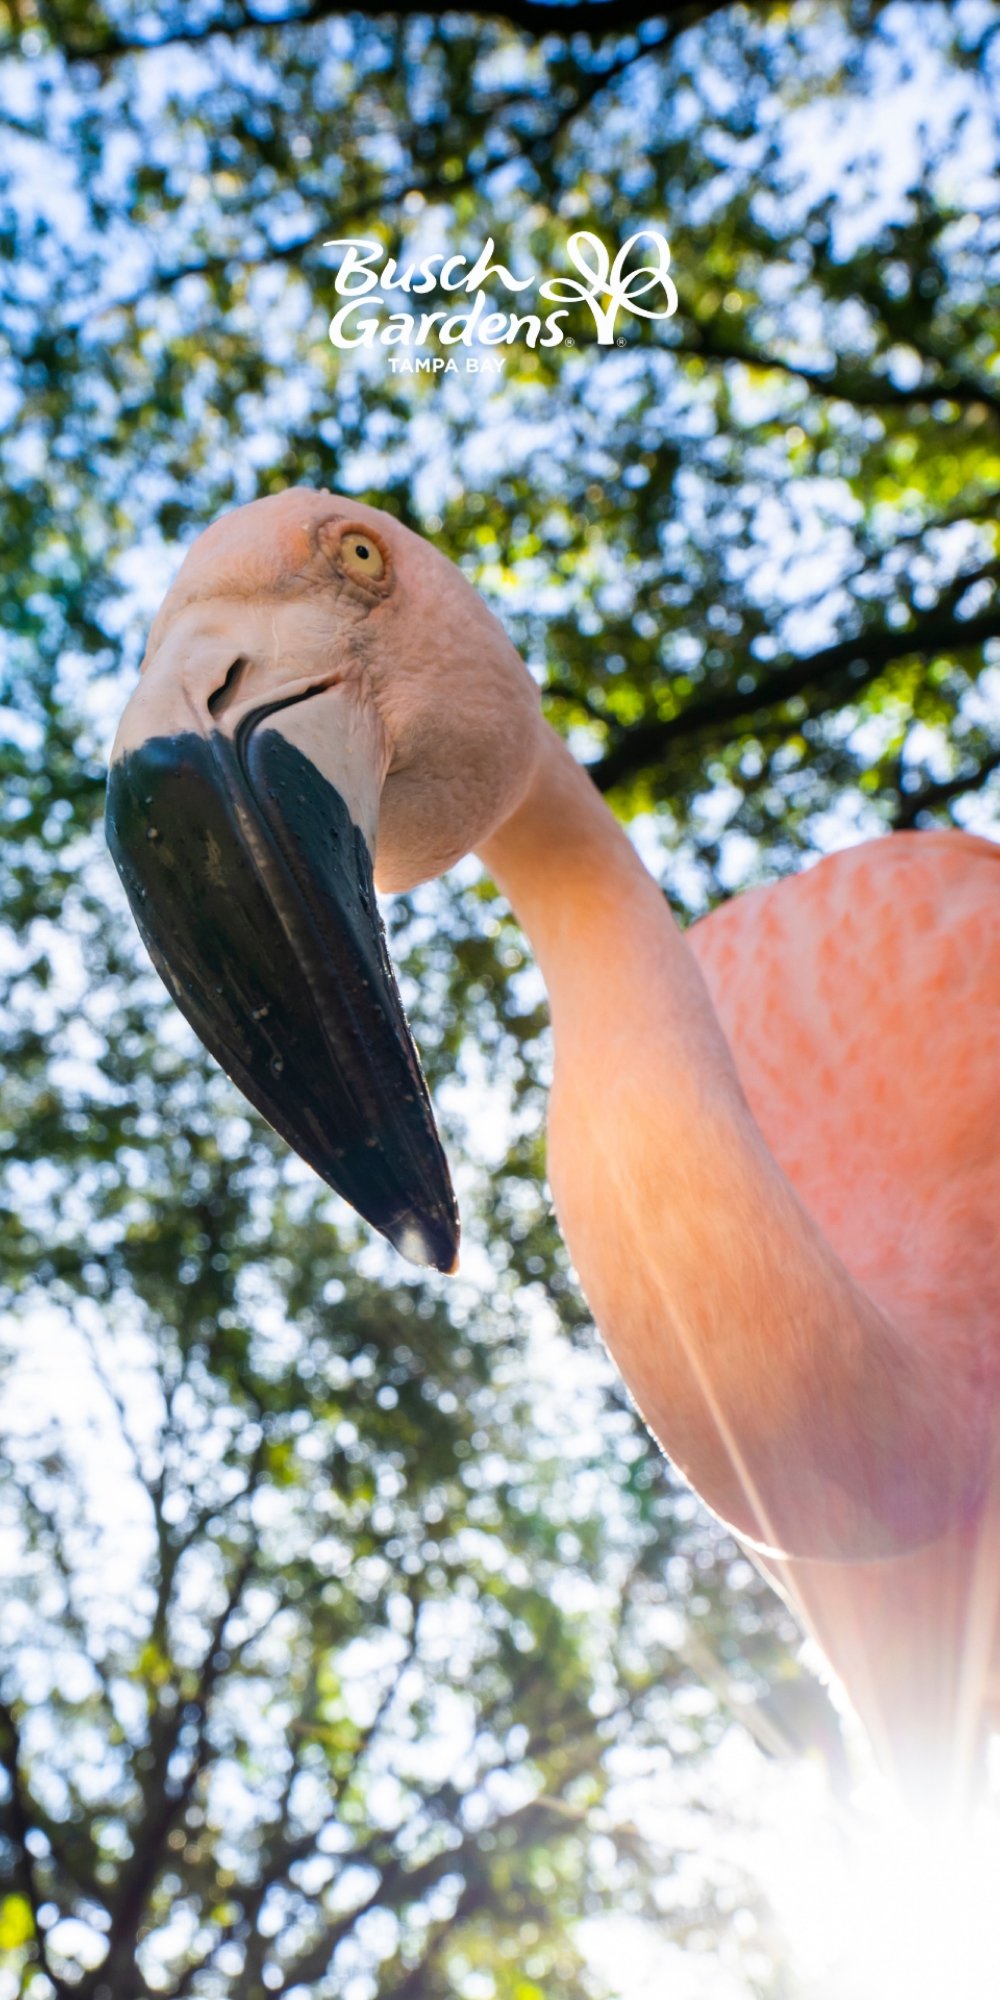 Busch Gardens Tampa Bay Celebrates National Zoo and Aquarium Month with phone wallpapers of your favorite animals.